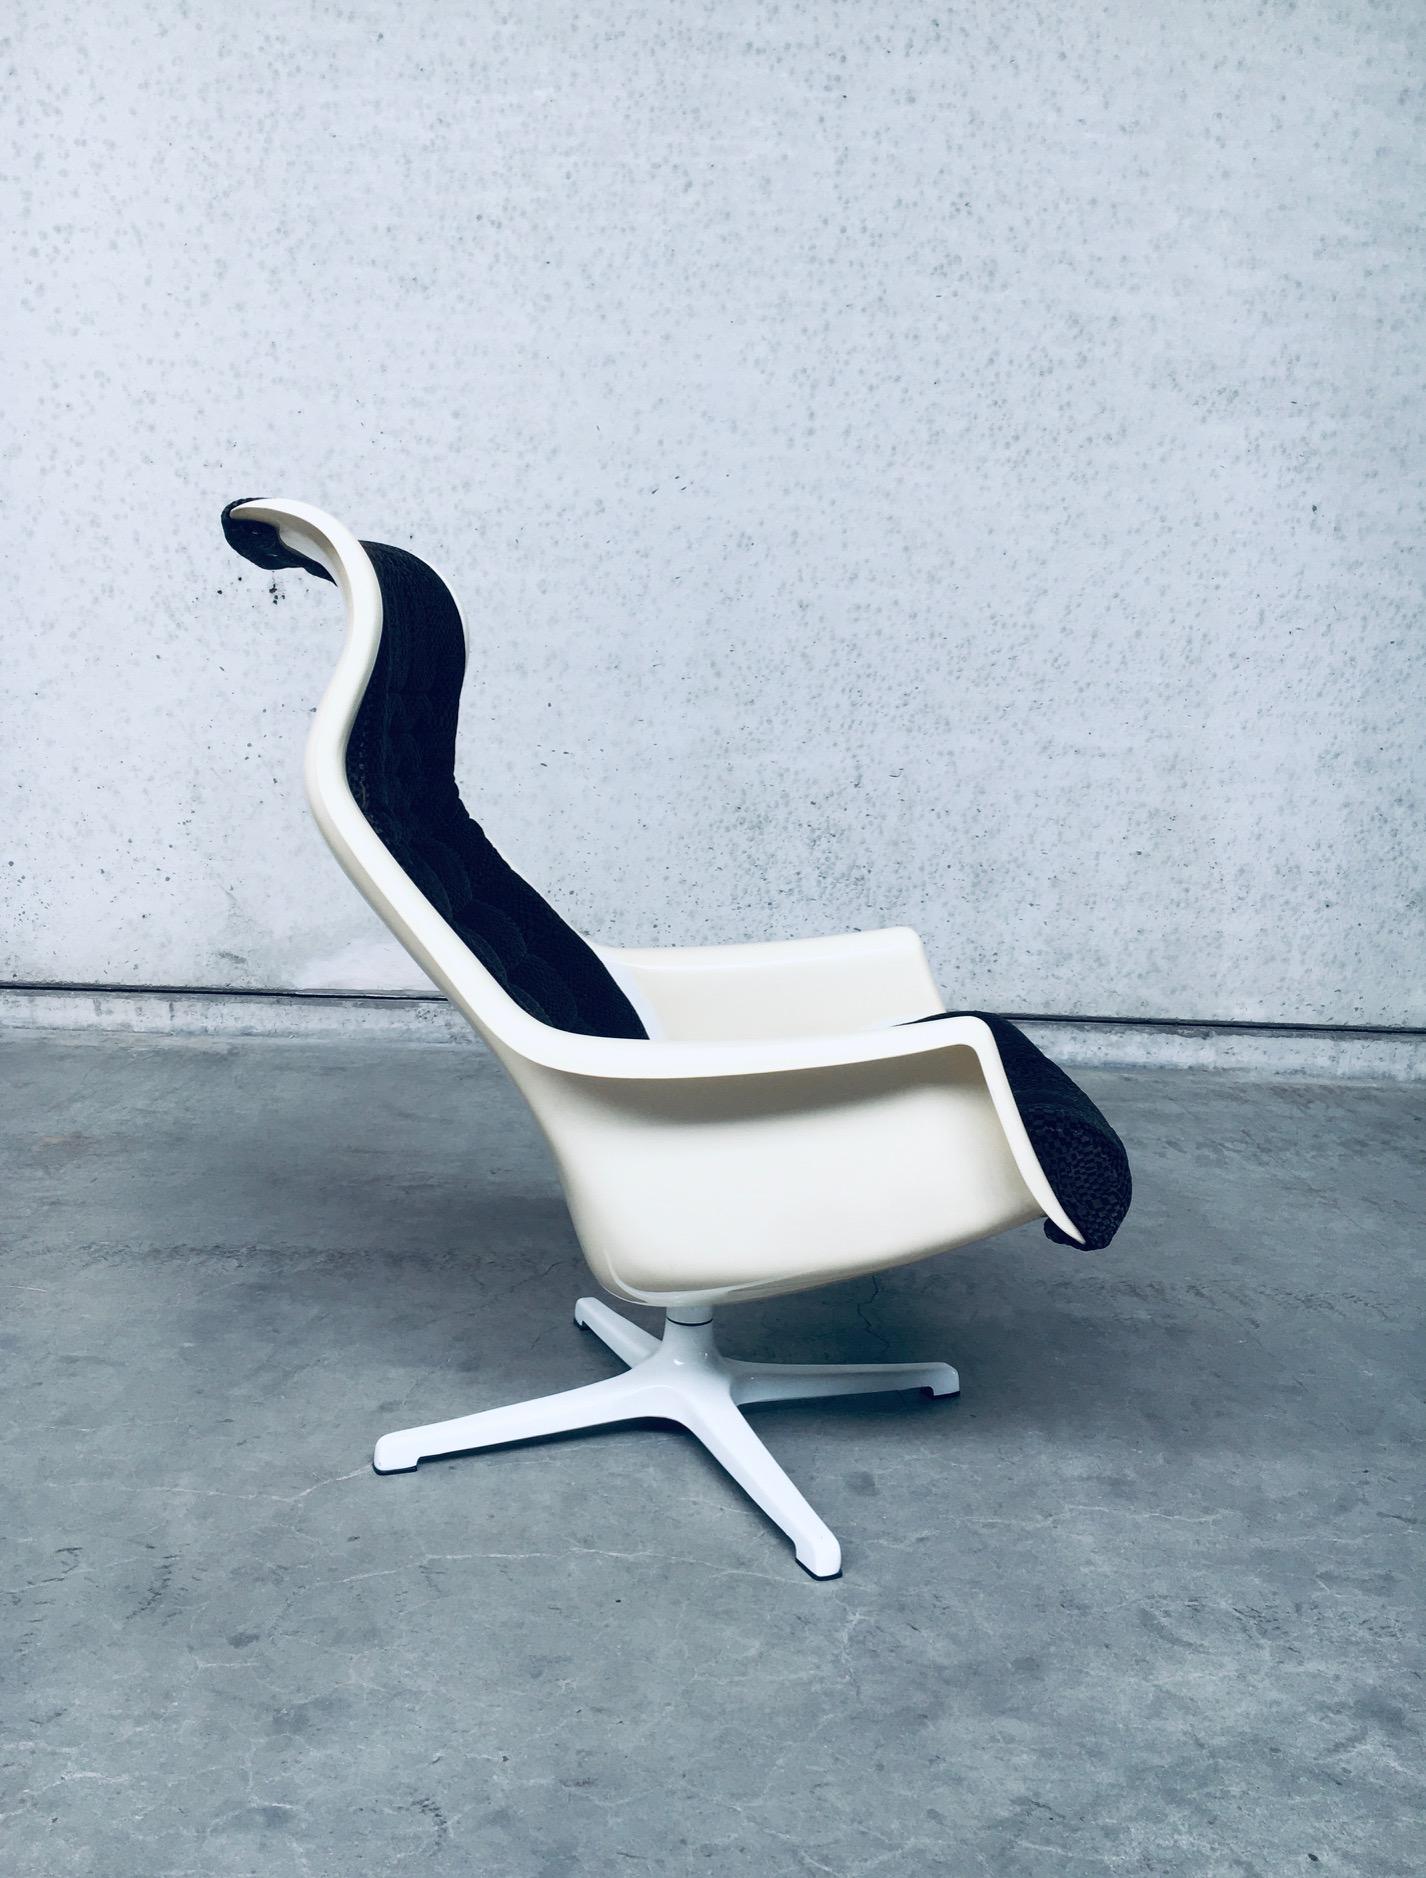 Mid-20th Century Midcentury Modern 'Galaxy' Lounge Chair by Alf Svensson for Dux, Denmark 1960's